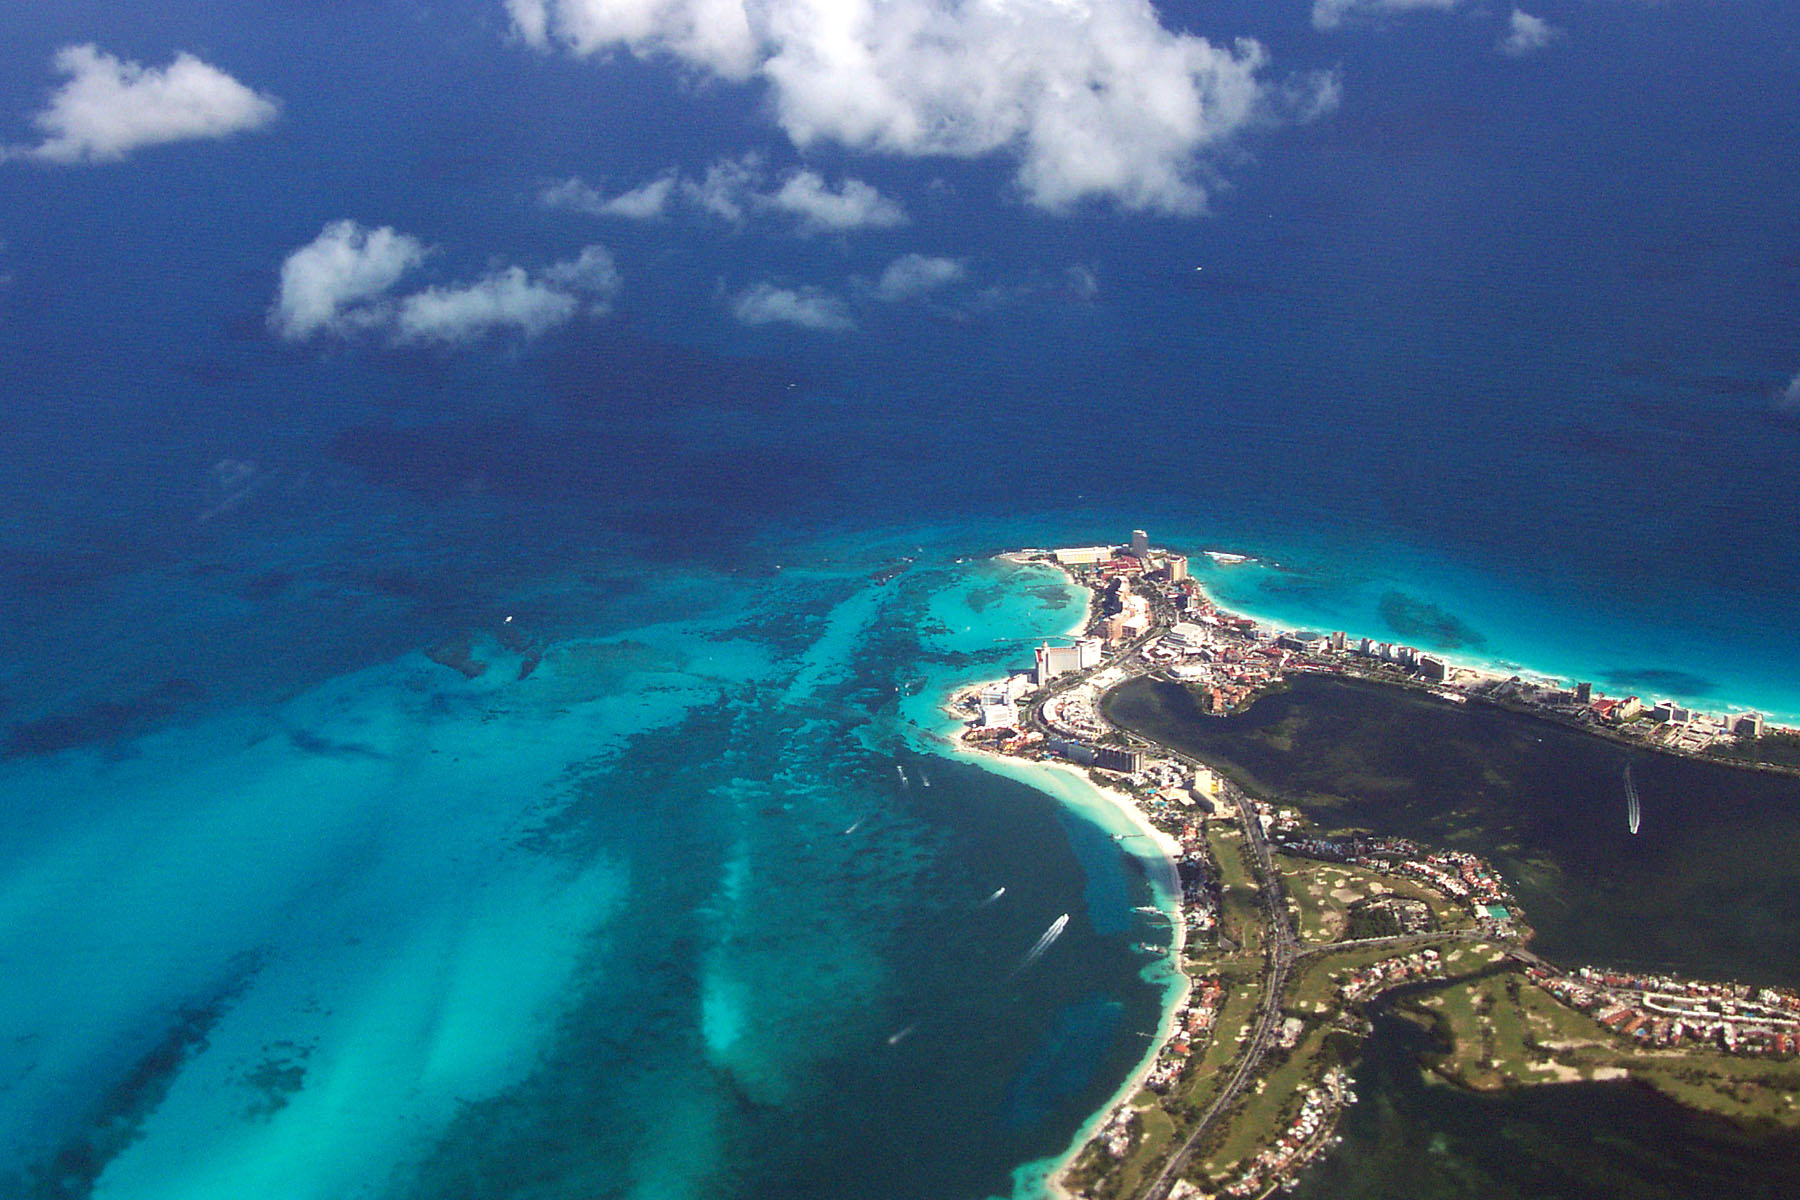 Calgary to Cancun, Mexico w/ American Airlines [Oct]